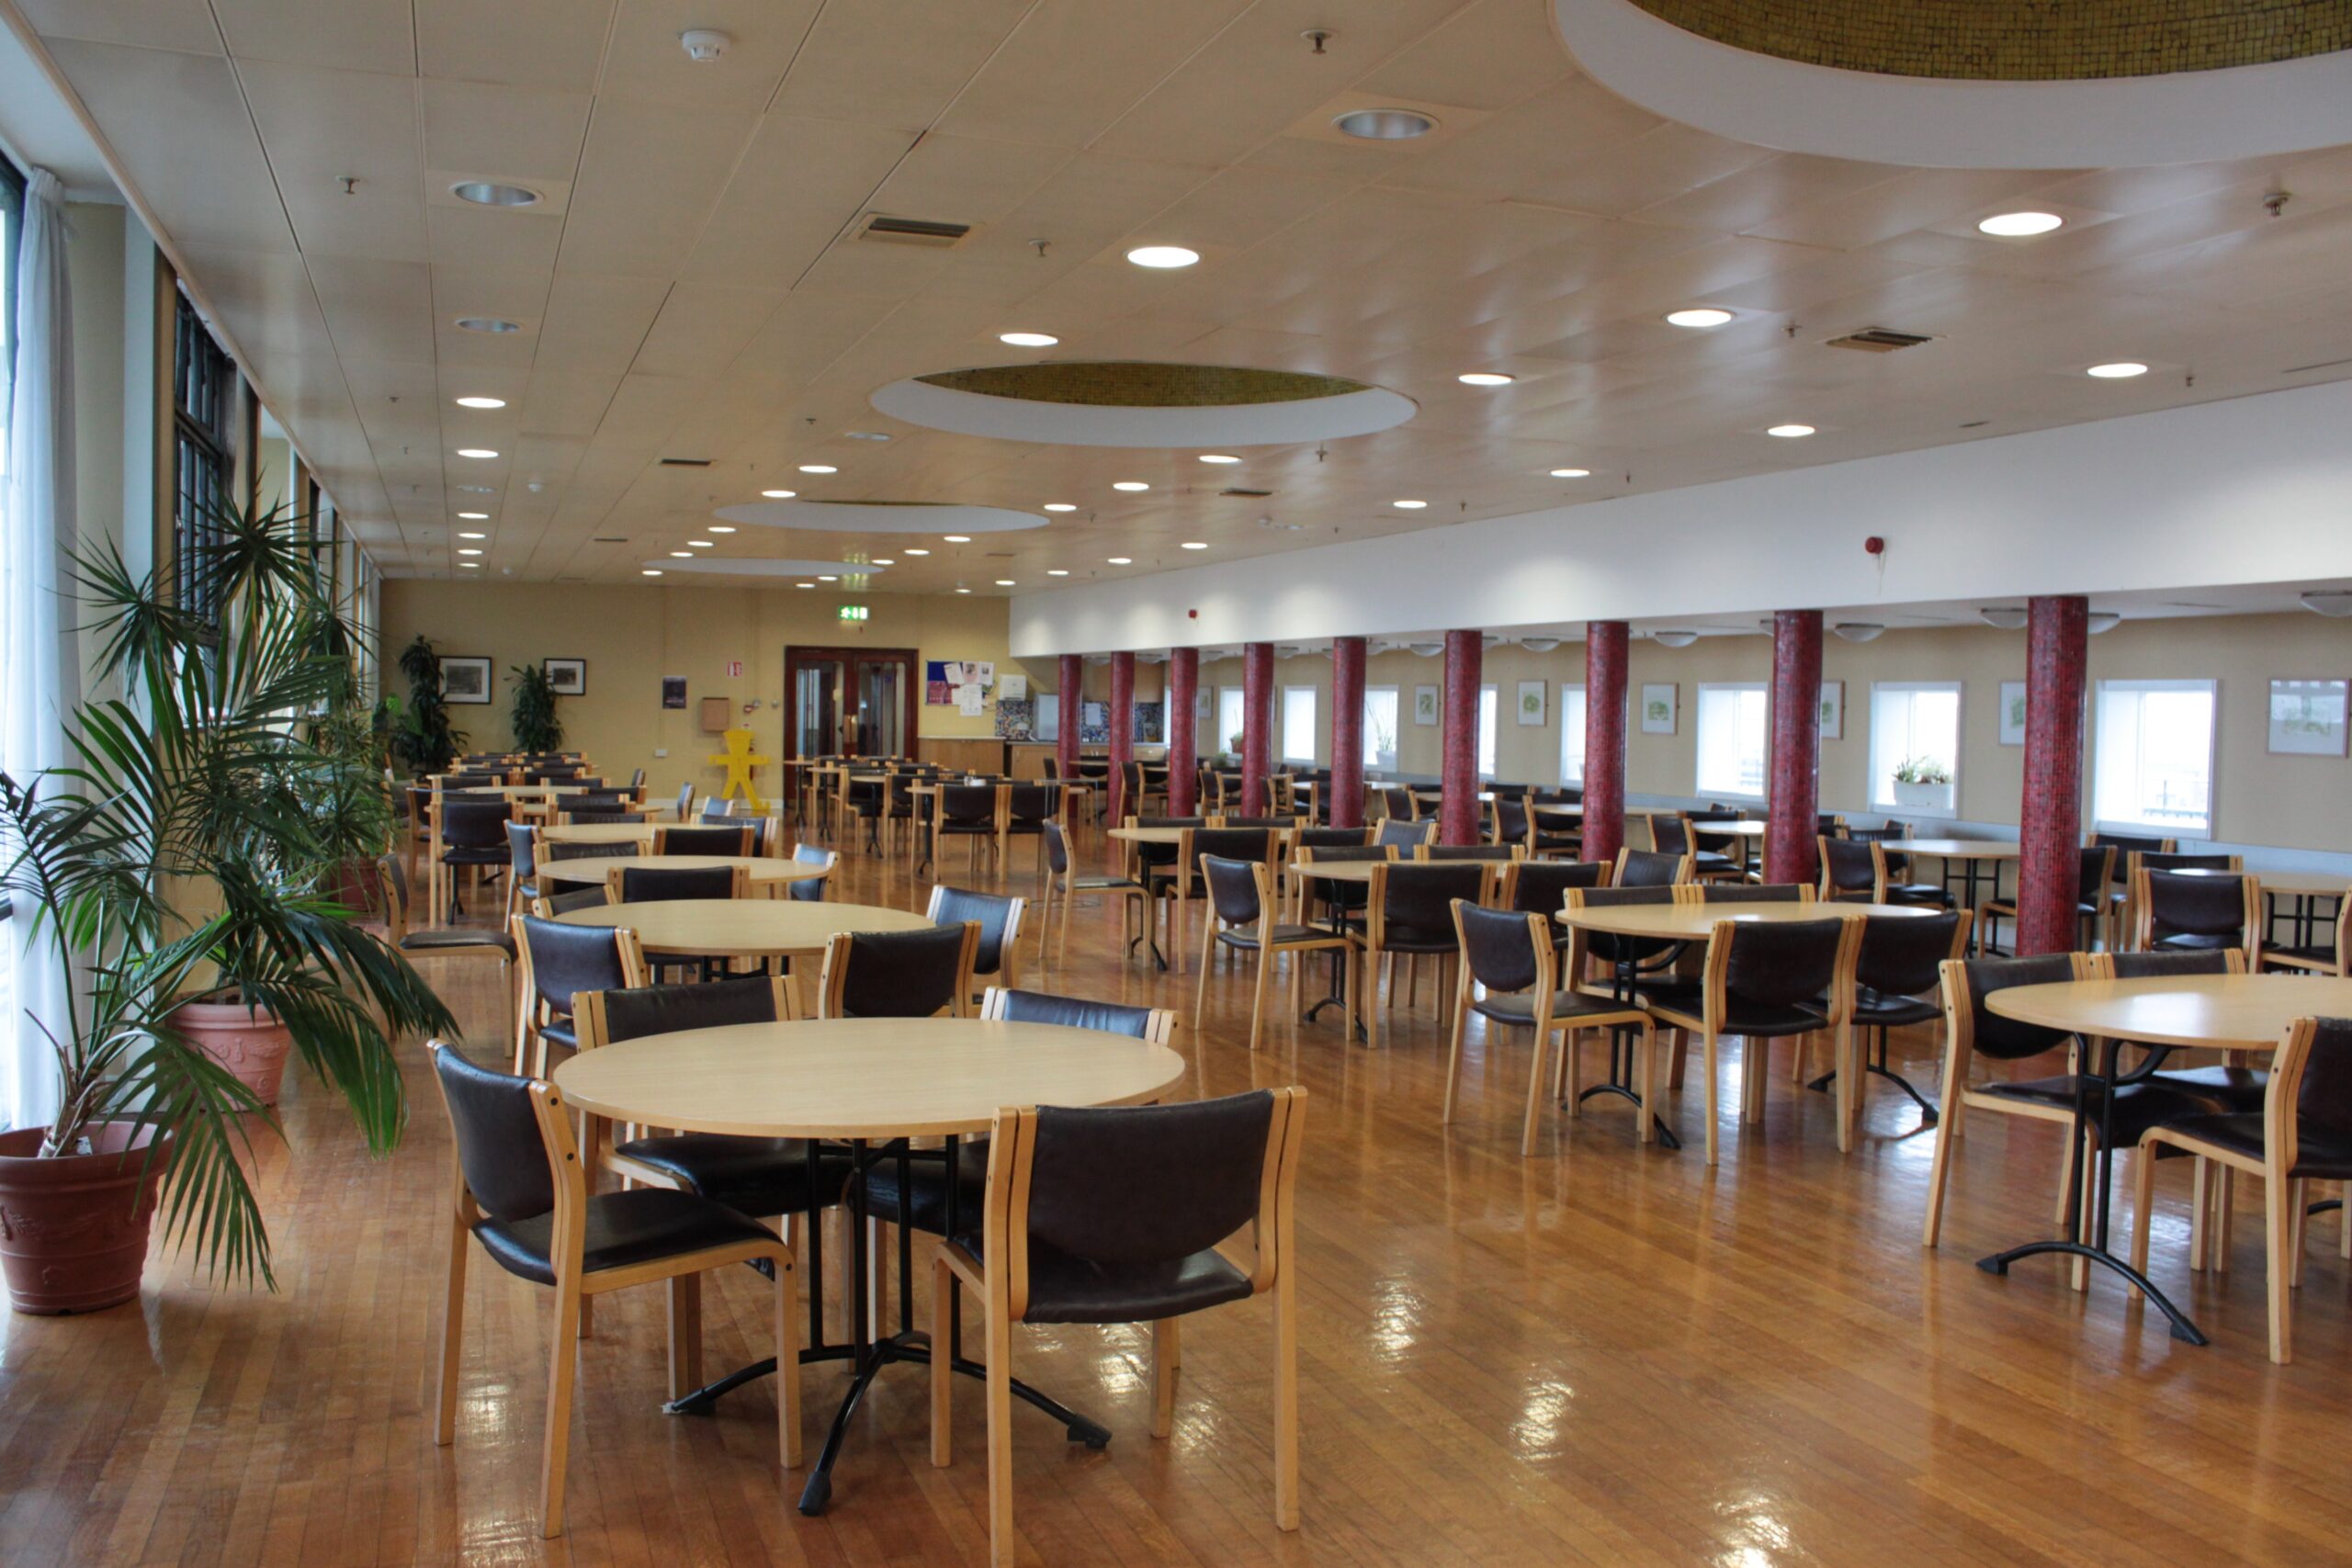 Building interior showing cafeteria a spacious area with tables and chairs